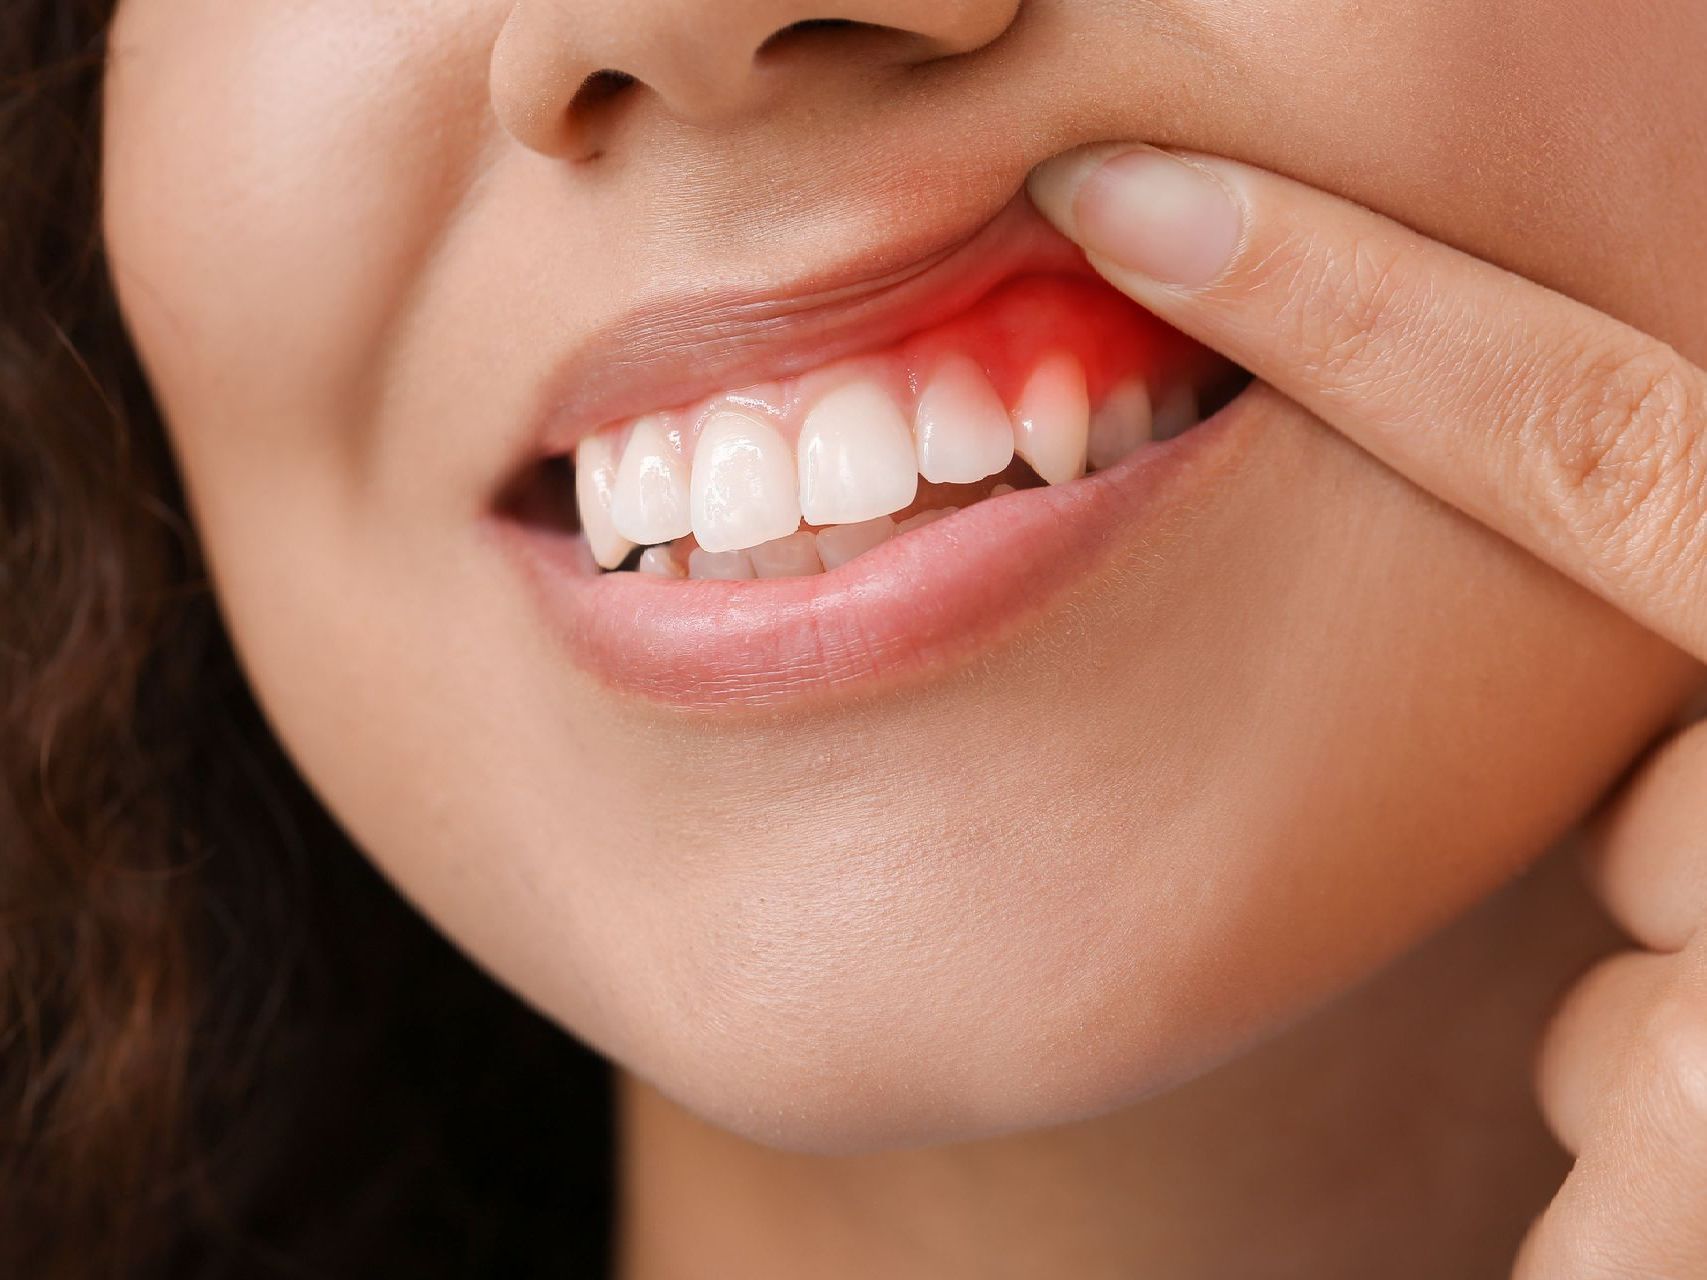 A close up of a woman's teeth with a red area indicating tooth pain